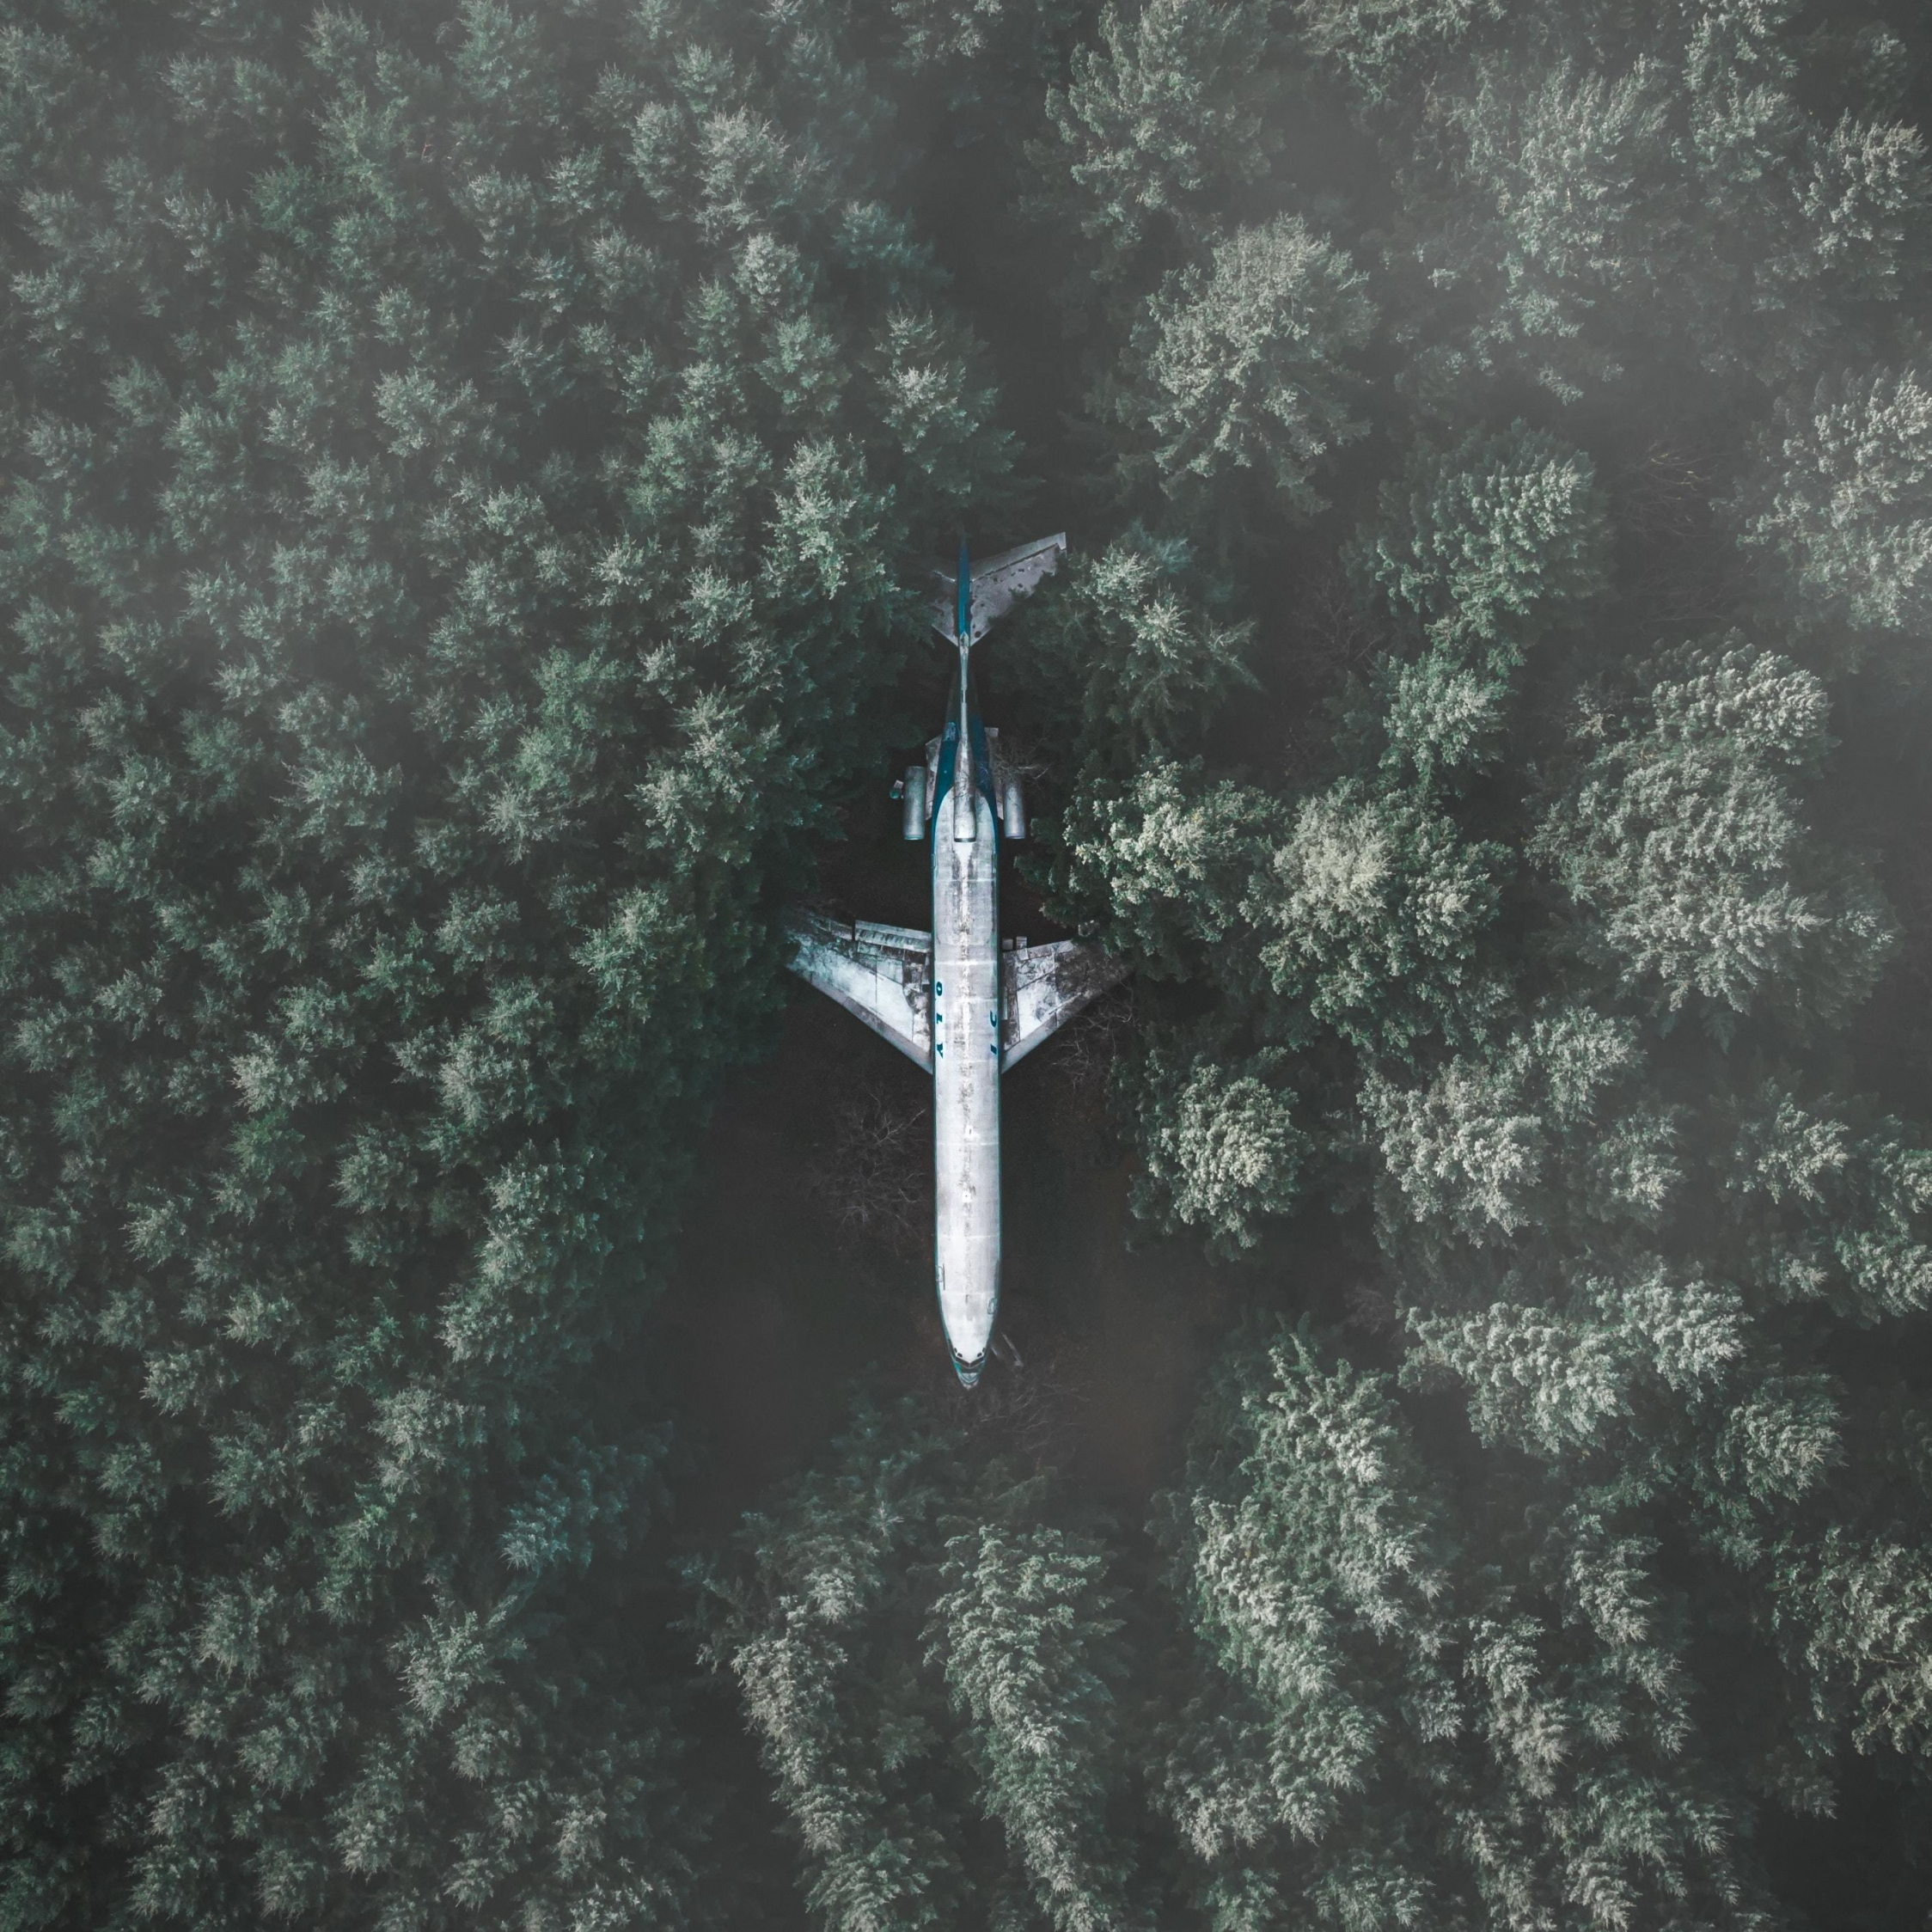 Download wallpaper 2248x2248 airplane, forest, aerial view, ipad air, ipad  air 2, ipad 3, ipad 4, ipad mini 2, ipad mini 3, 2248x2248 hd background,  23519